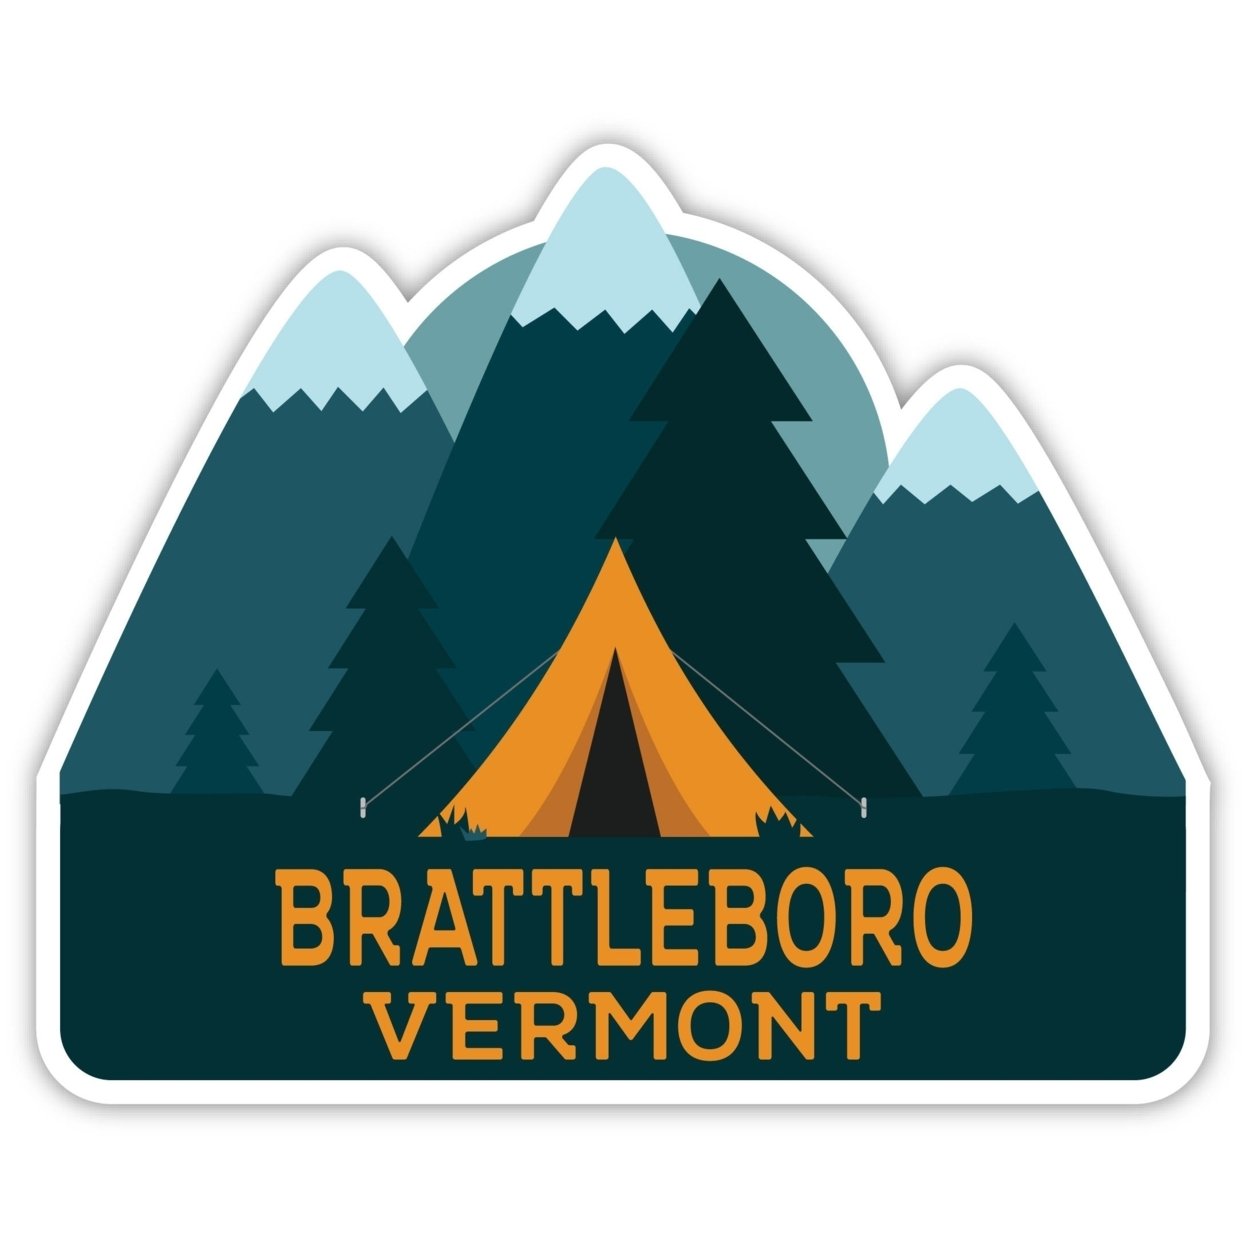 Brattleboro Vermont Souvenir Decorative Stickers (Choose Theme And Size) - 4-Pack, 4-Inch, Great Outdoors